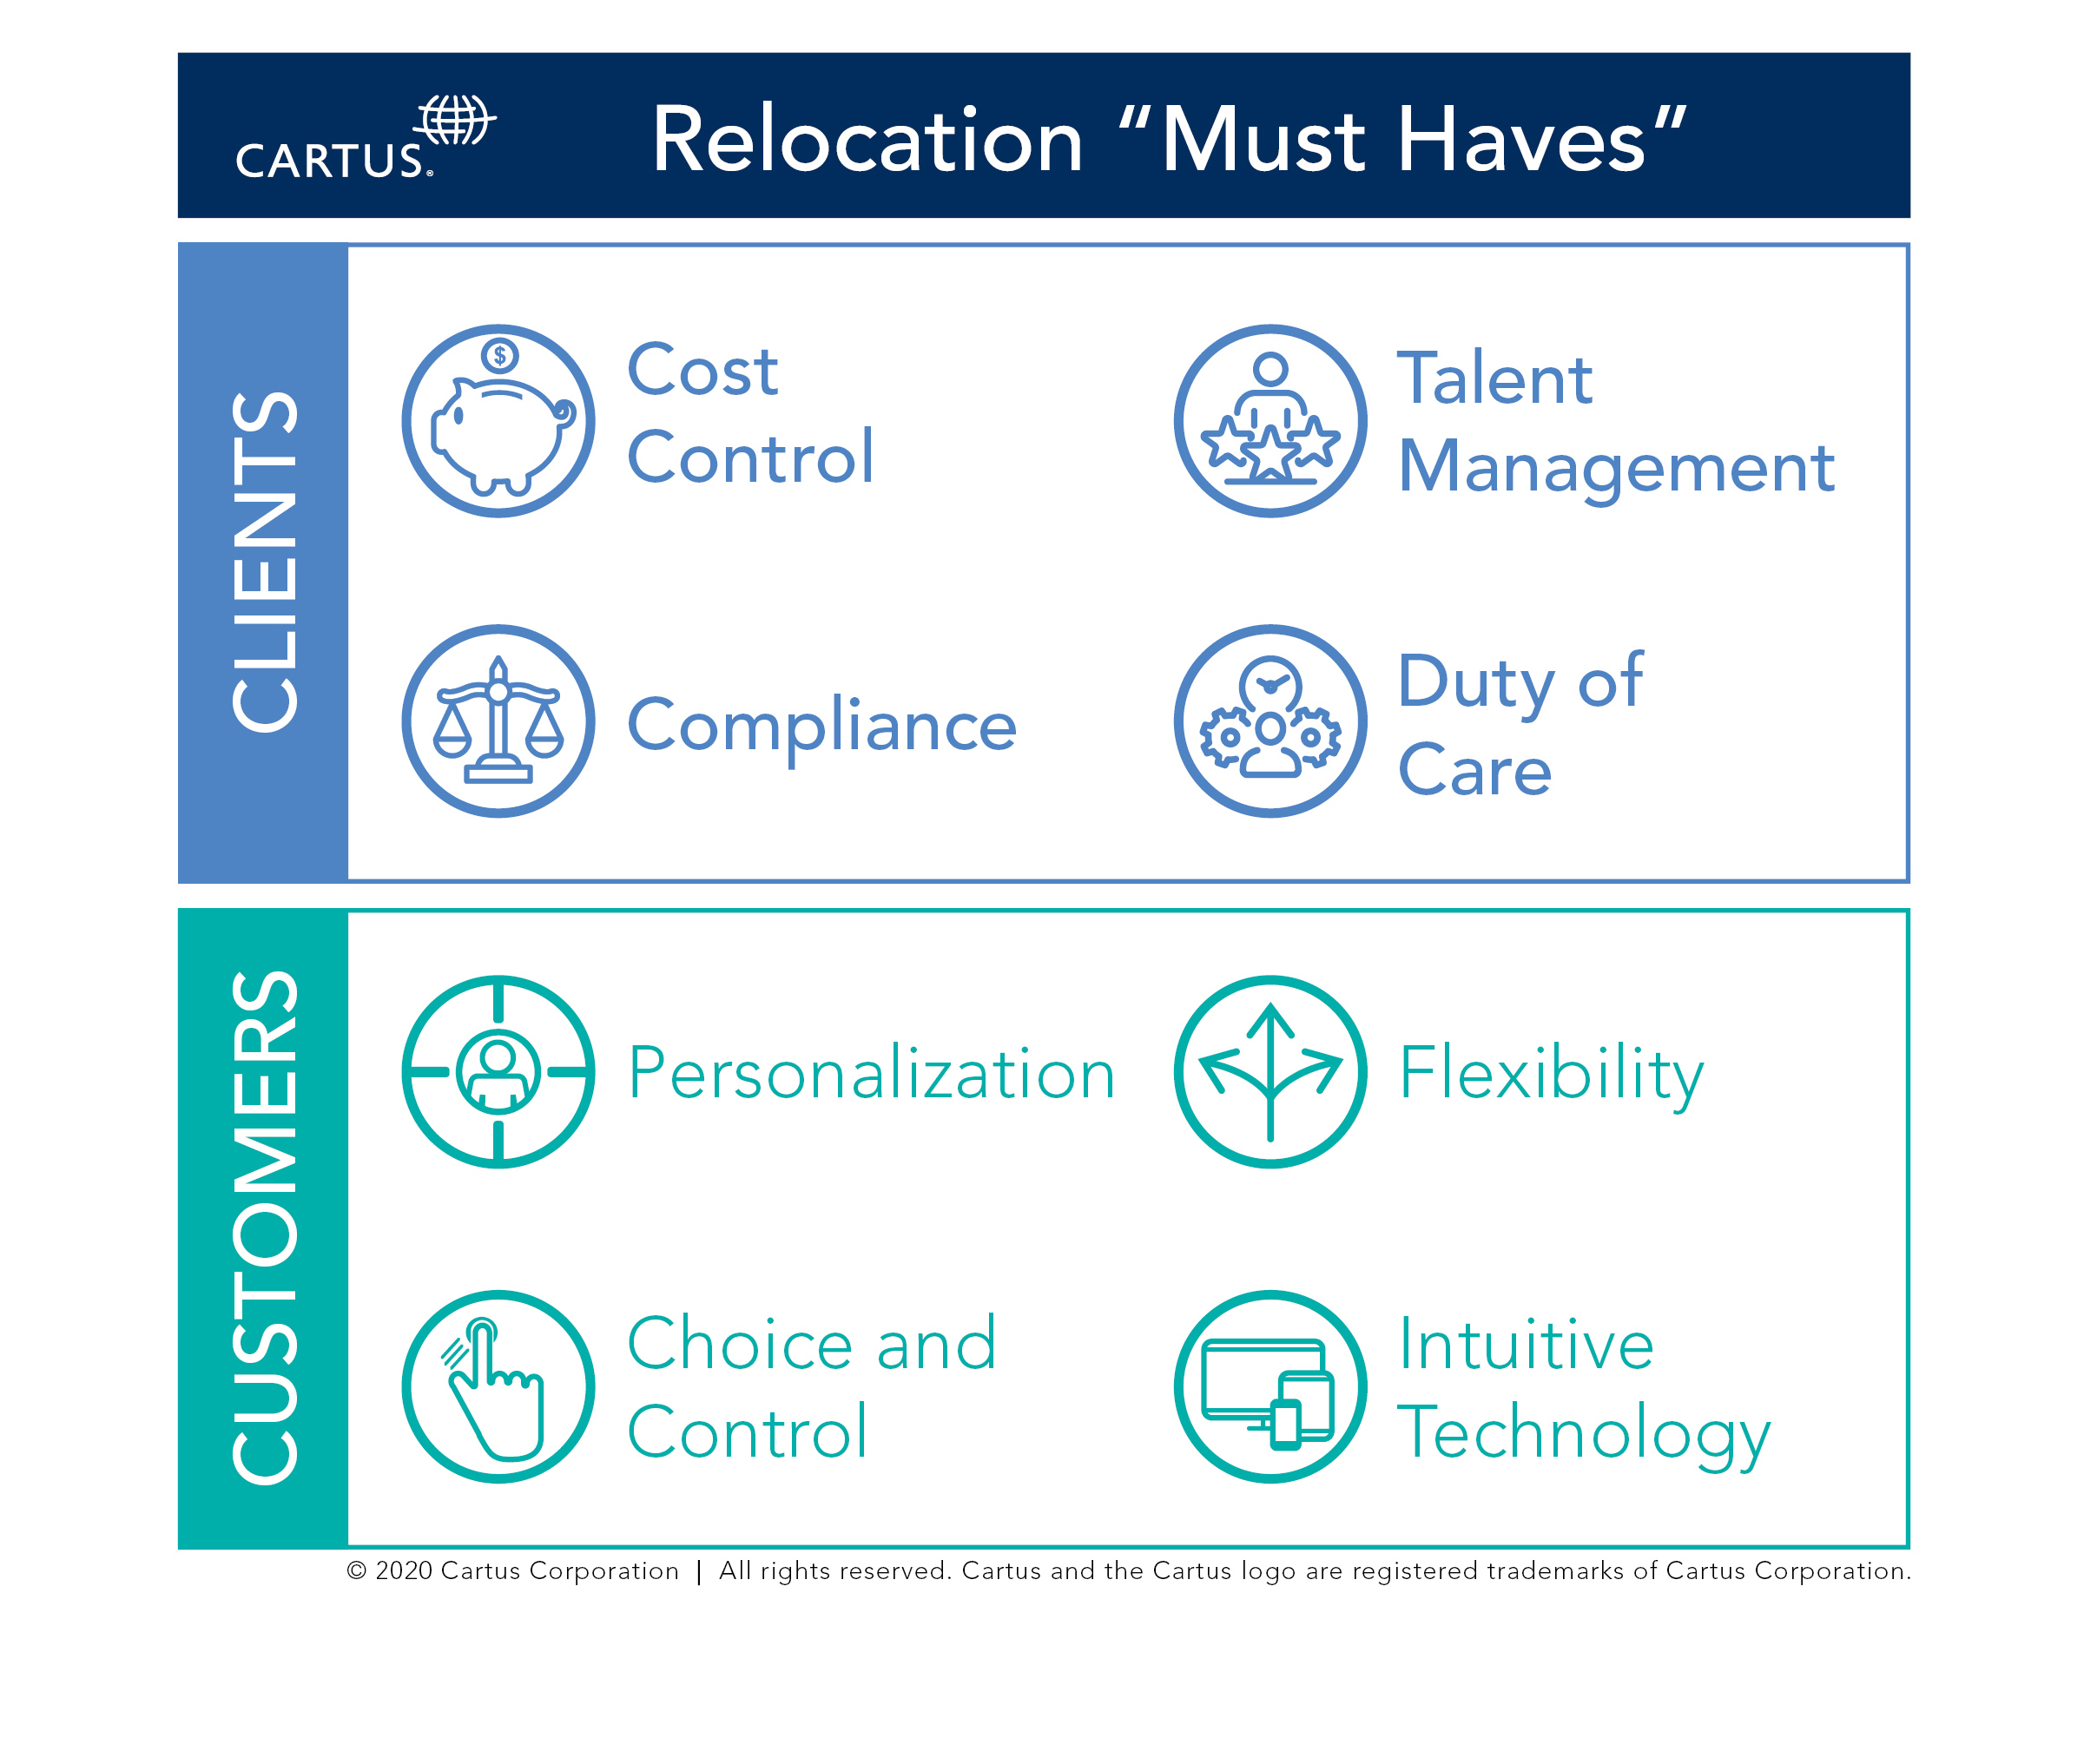 Relocation "Must Haves" Infographic